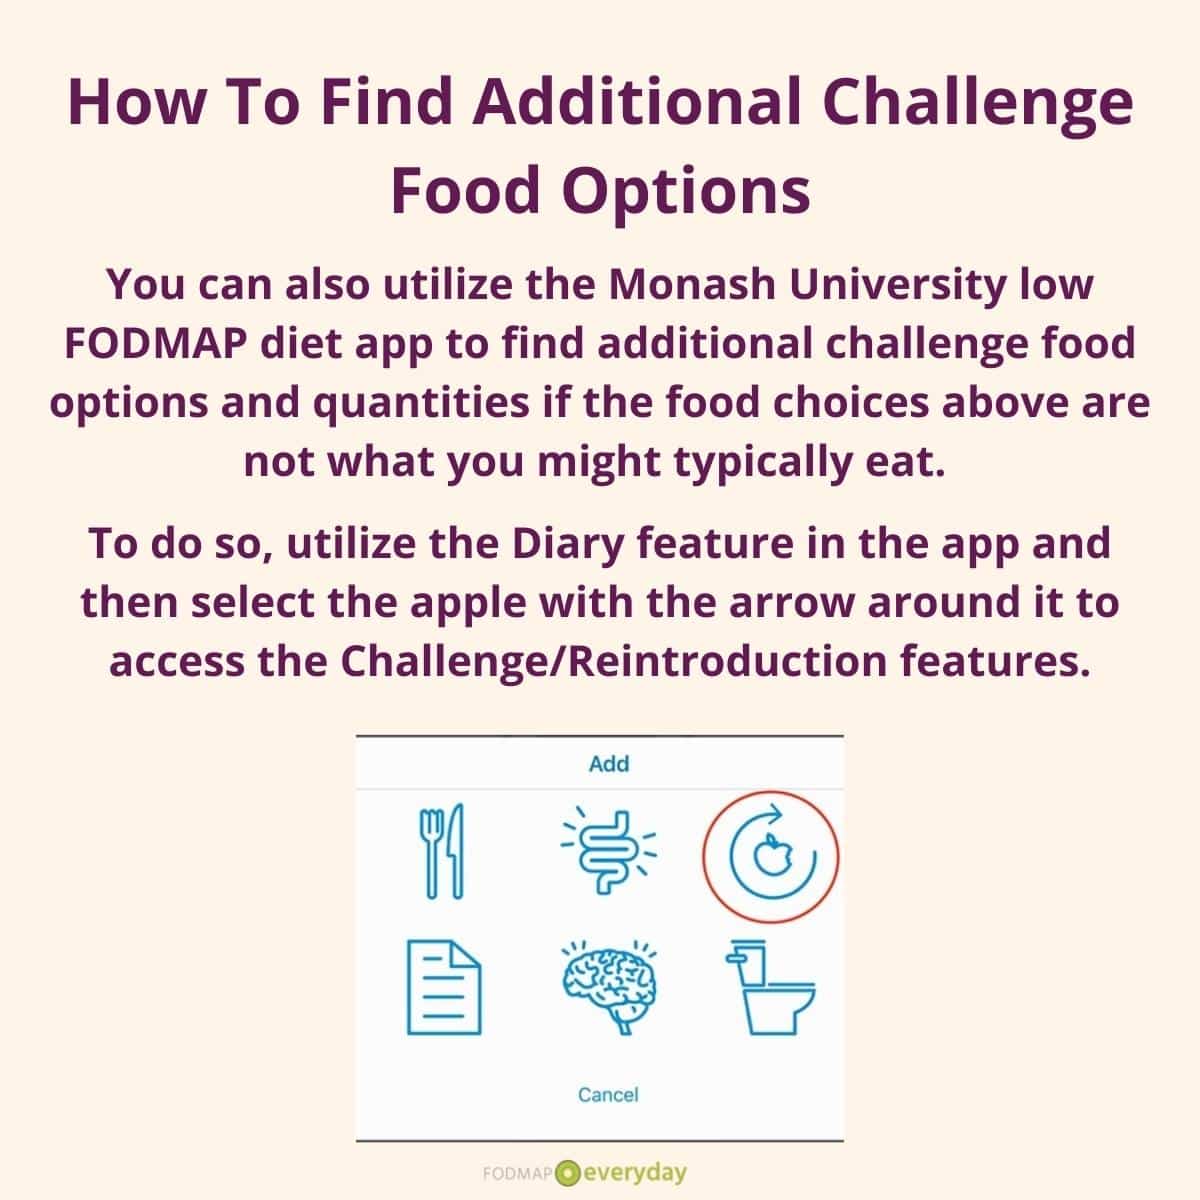 how to use the monash app for more challenge foods